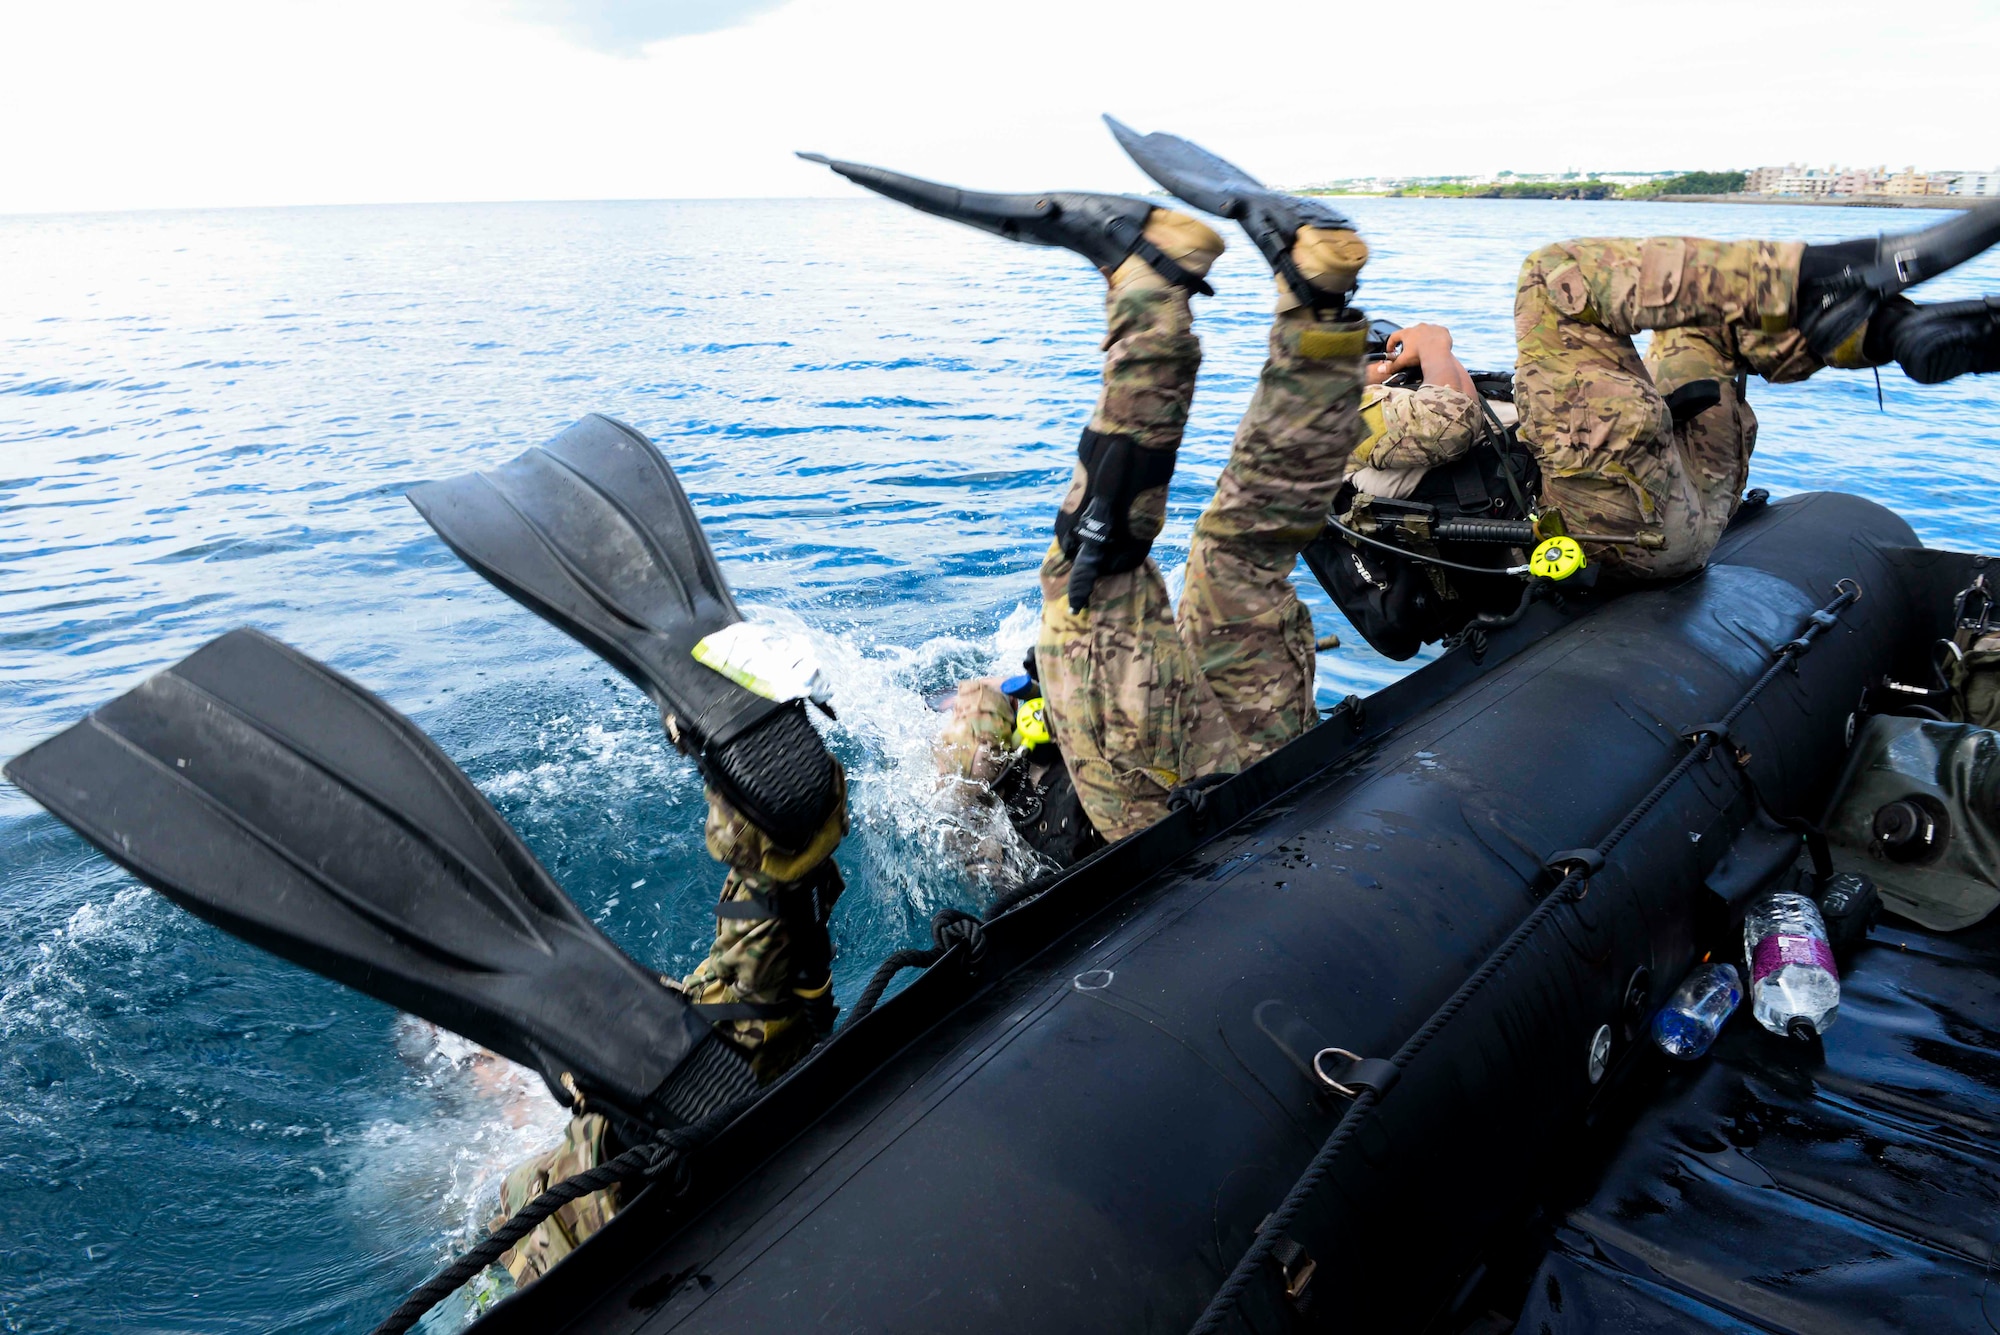 Members of the 320th Special Tactics Squadron from Kadena Air Base submerge into the ocean during an amphibious operations exercise Sept. 22, 2015, off the West Coast of Okinawa, Japan. Special tactics Airmen train frequently to sharpen their skillsets in order to support airpower throughout the full spectrum of mission sets U.S. Special Operations Command undertakes. (U.S. Air Force photo by Senior Airman John Linzmeier)